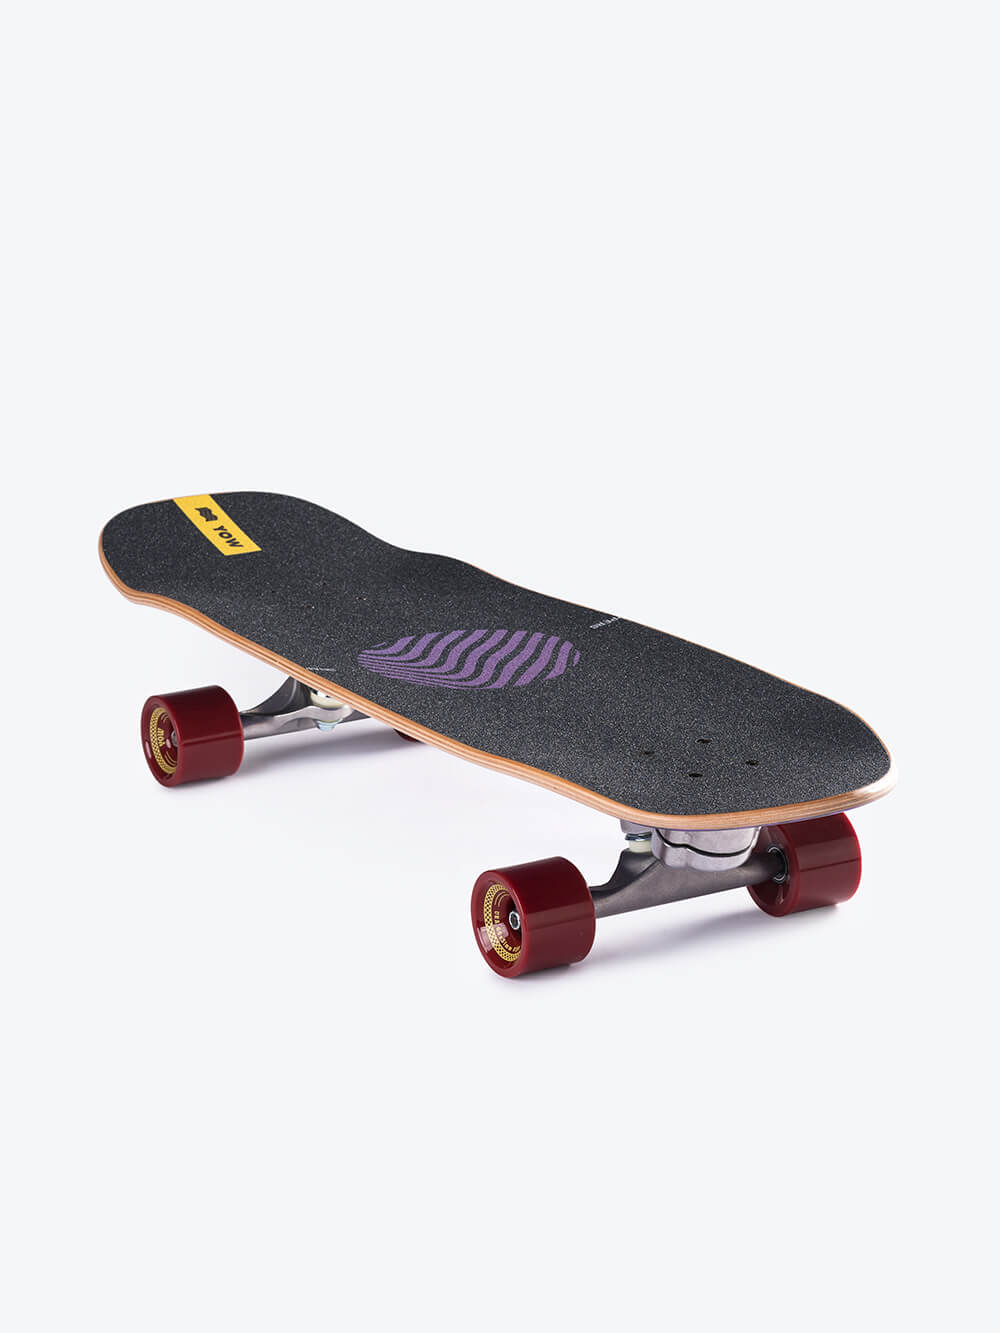 Yow Surfskate Snappers 32.5 High Performance Series